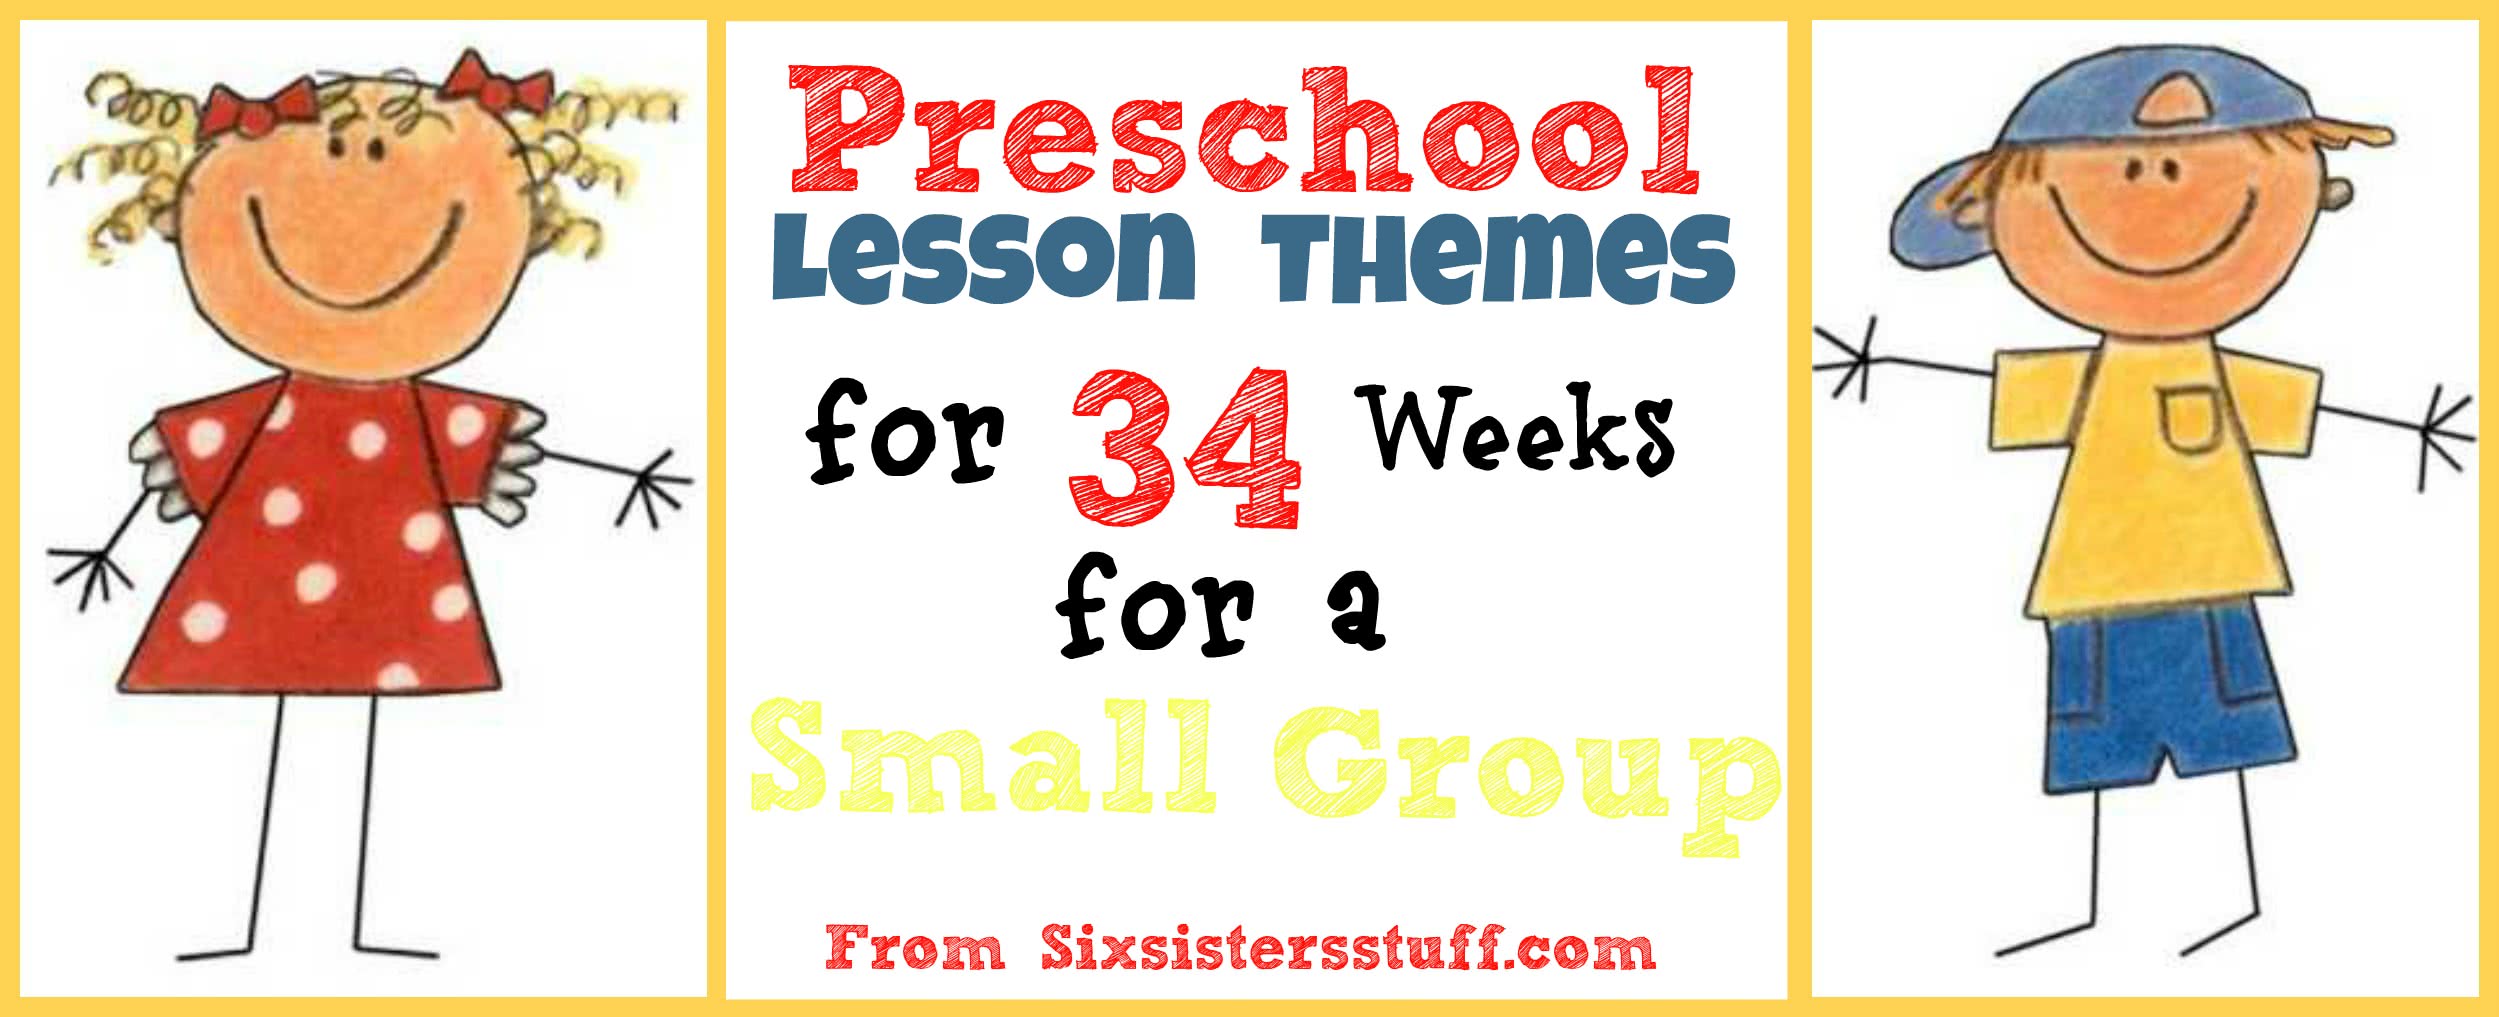 Preschool Lesson Themes for 34 Weeks for a Small Group